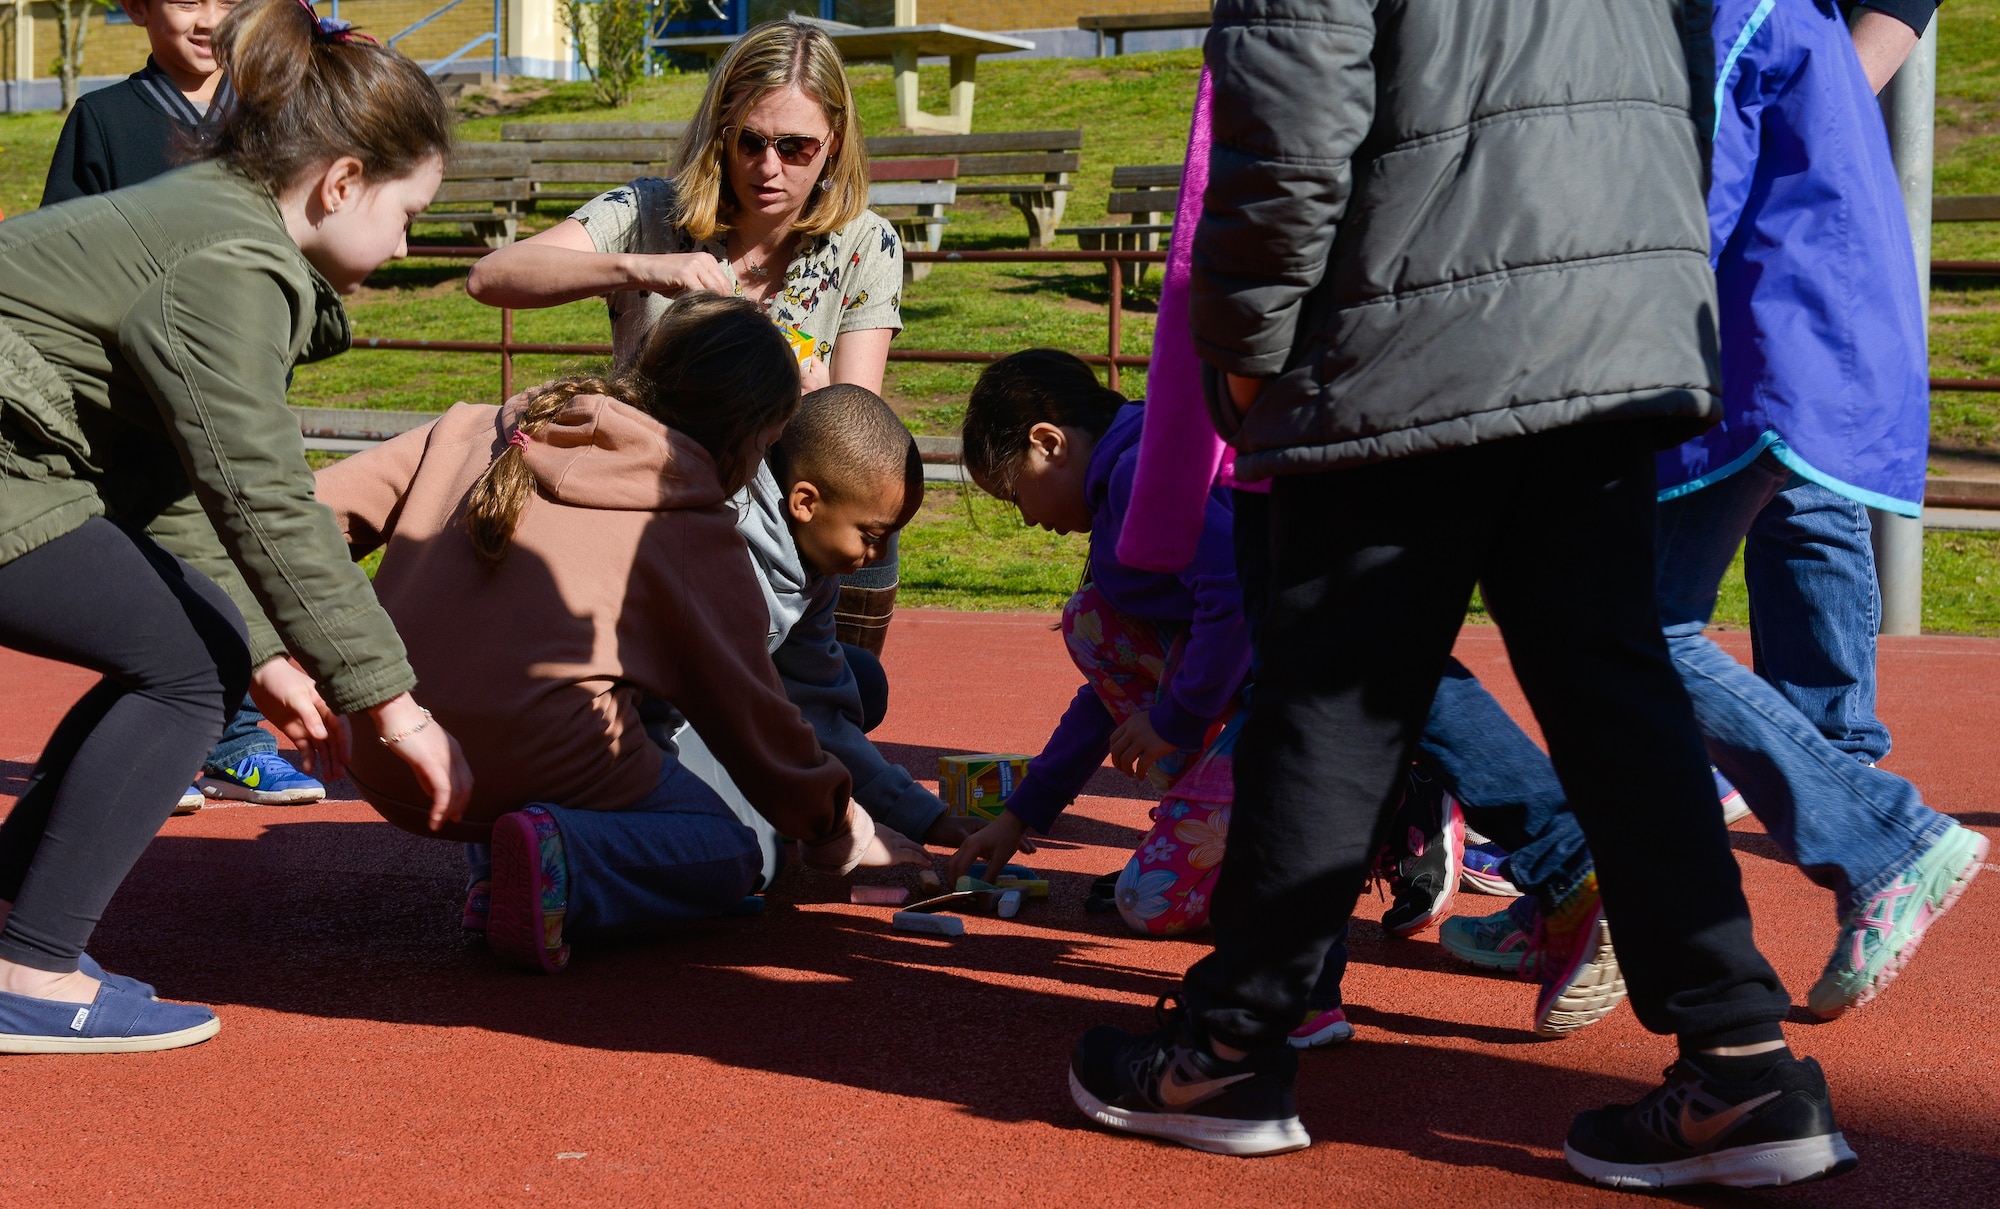 Children from Vogelweh Elementary School flock to grab chalk as they begin their therapy session April 21, 2016, at Vogelweh Air Base, Germany. The students go through therapy at school as they cope with being suddenly separated from family that is serving in Turkey. (U.S. Air force photo/Airman 1st Class Lane T. Plummer)